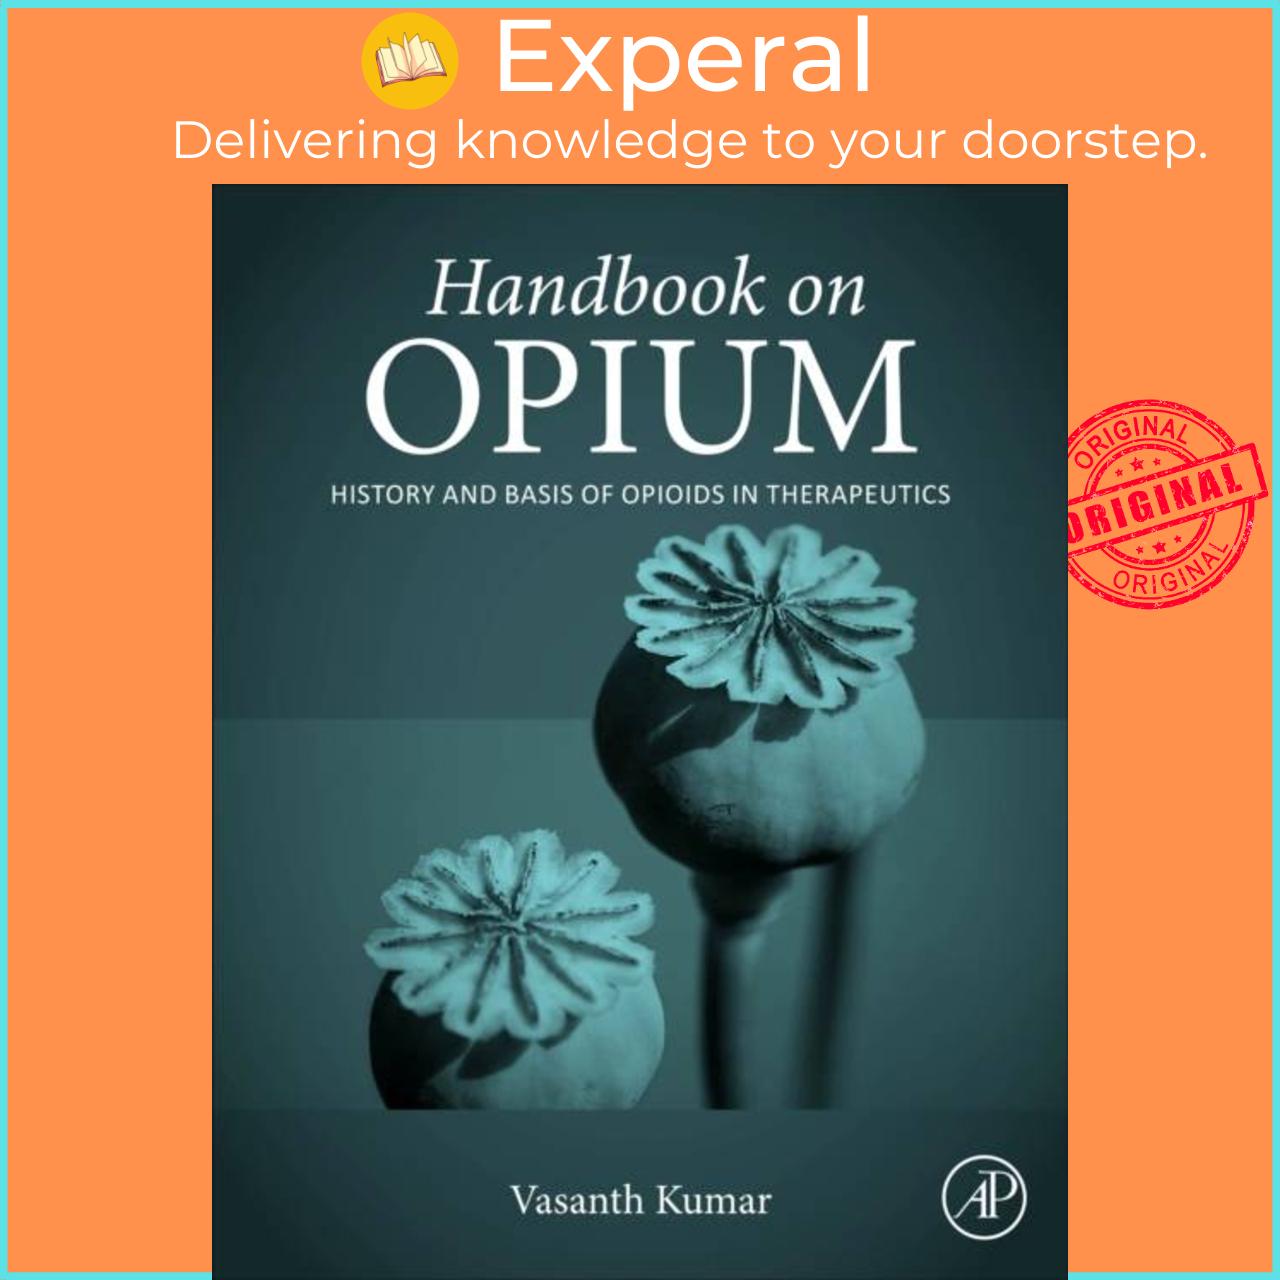 Sách - Handbook on Opium - History and Basis of Opioids in Therapeutics by Vasanth Kumar (UK edition, paperback)